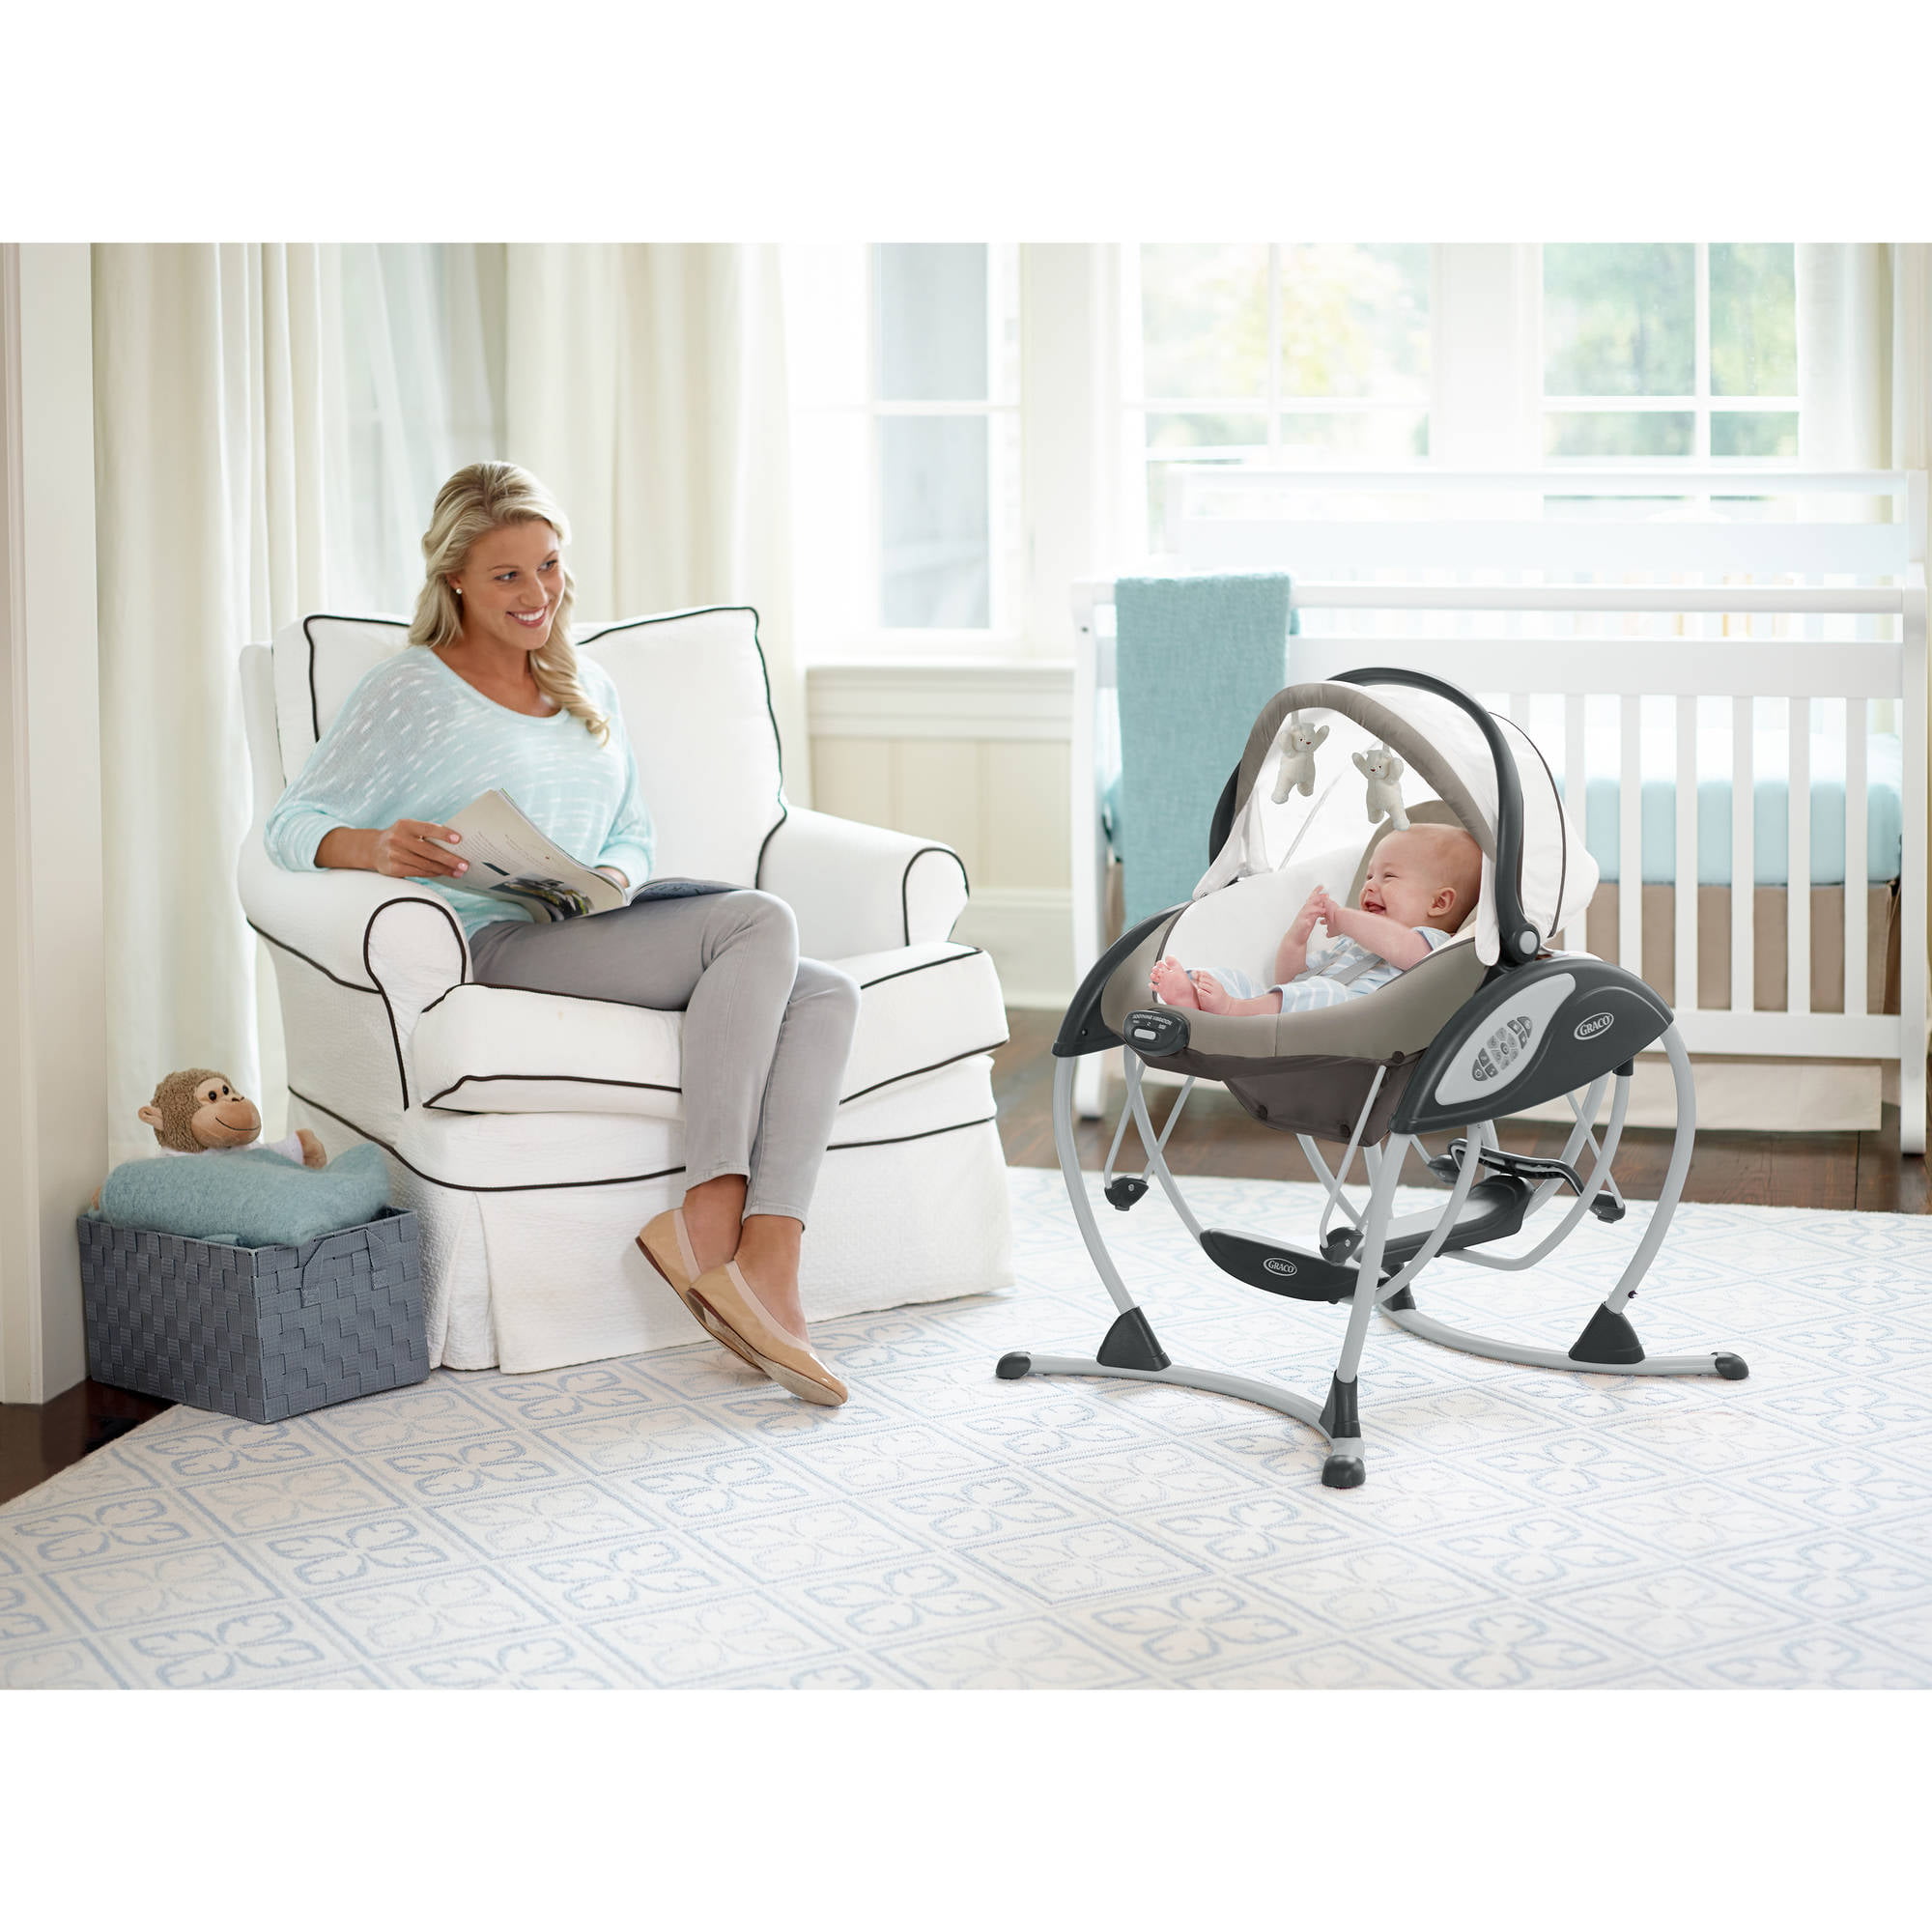 graco dreamglider target